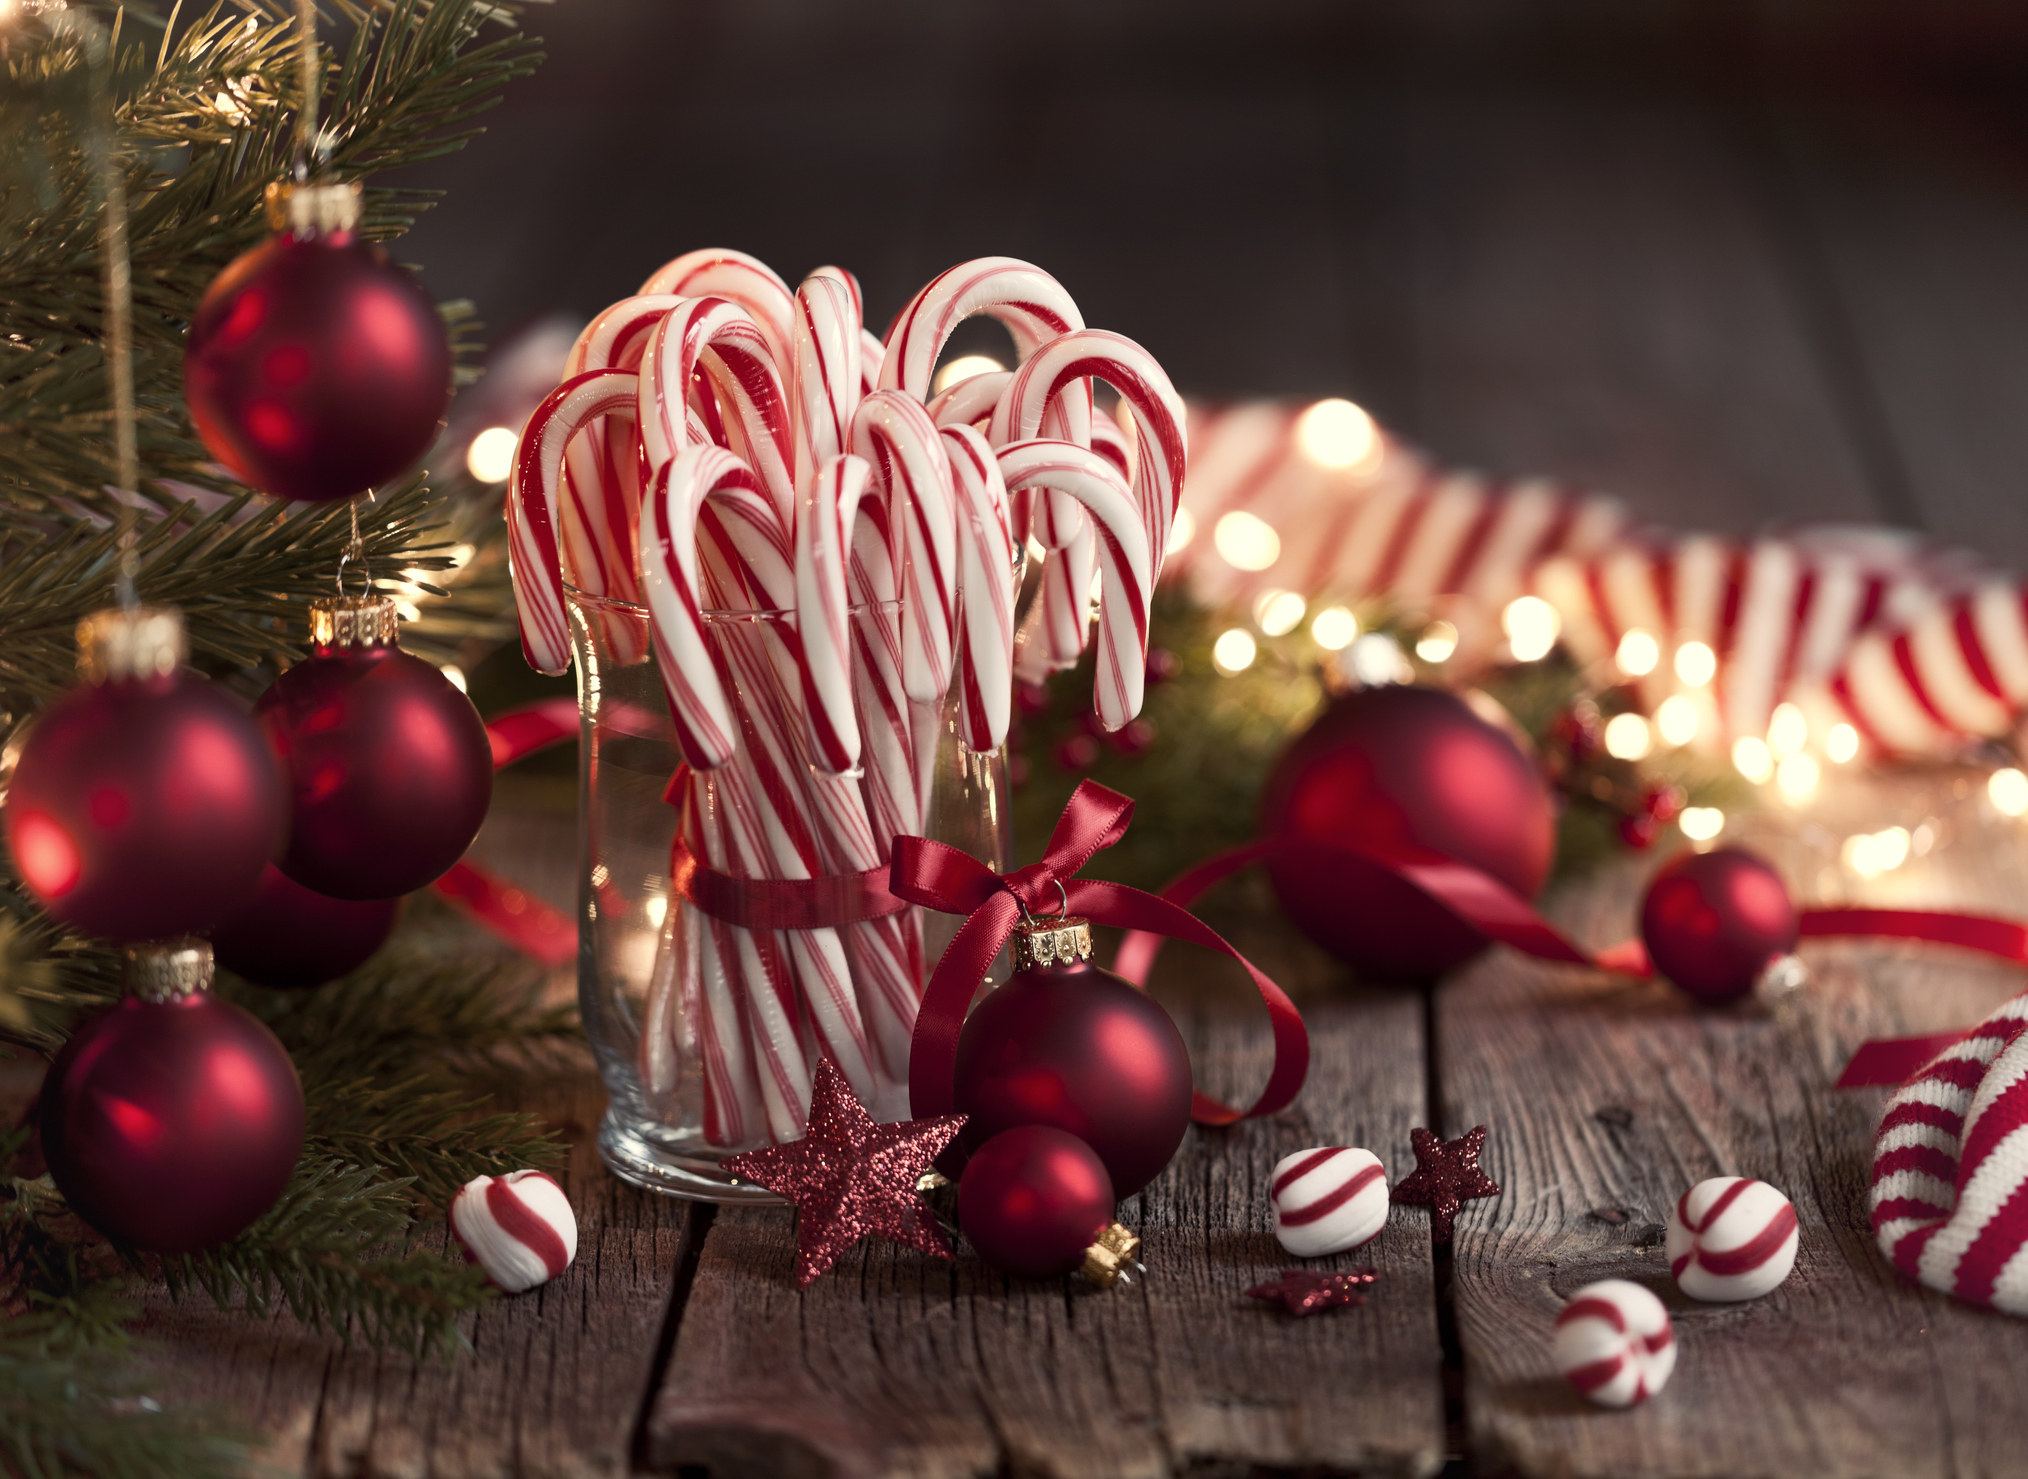 On a wooden table there is a glass with candy canes in it. Next to it is a christmas tree and there are red baubles everywhere.